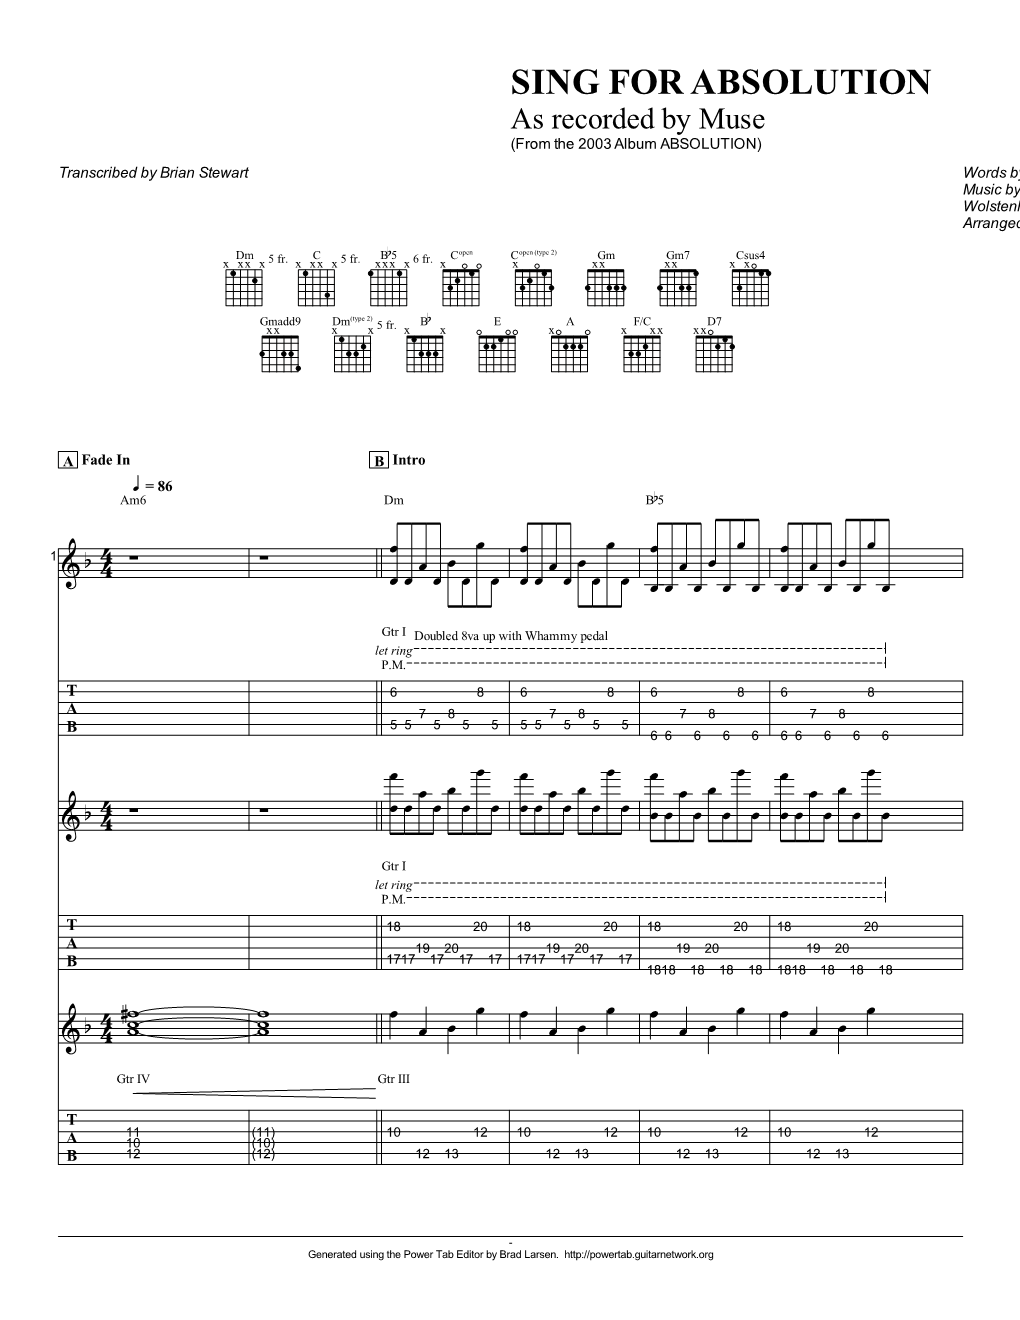 Sing for Absolution Guitar Tab